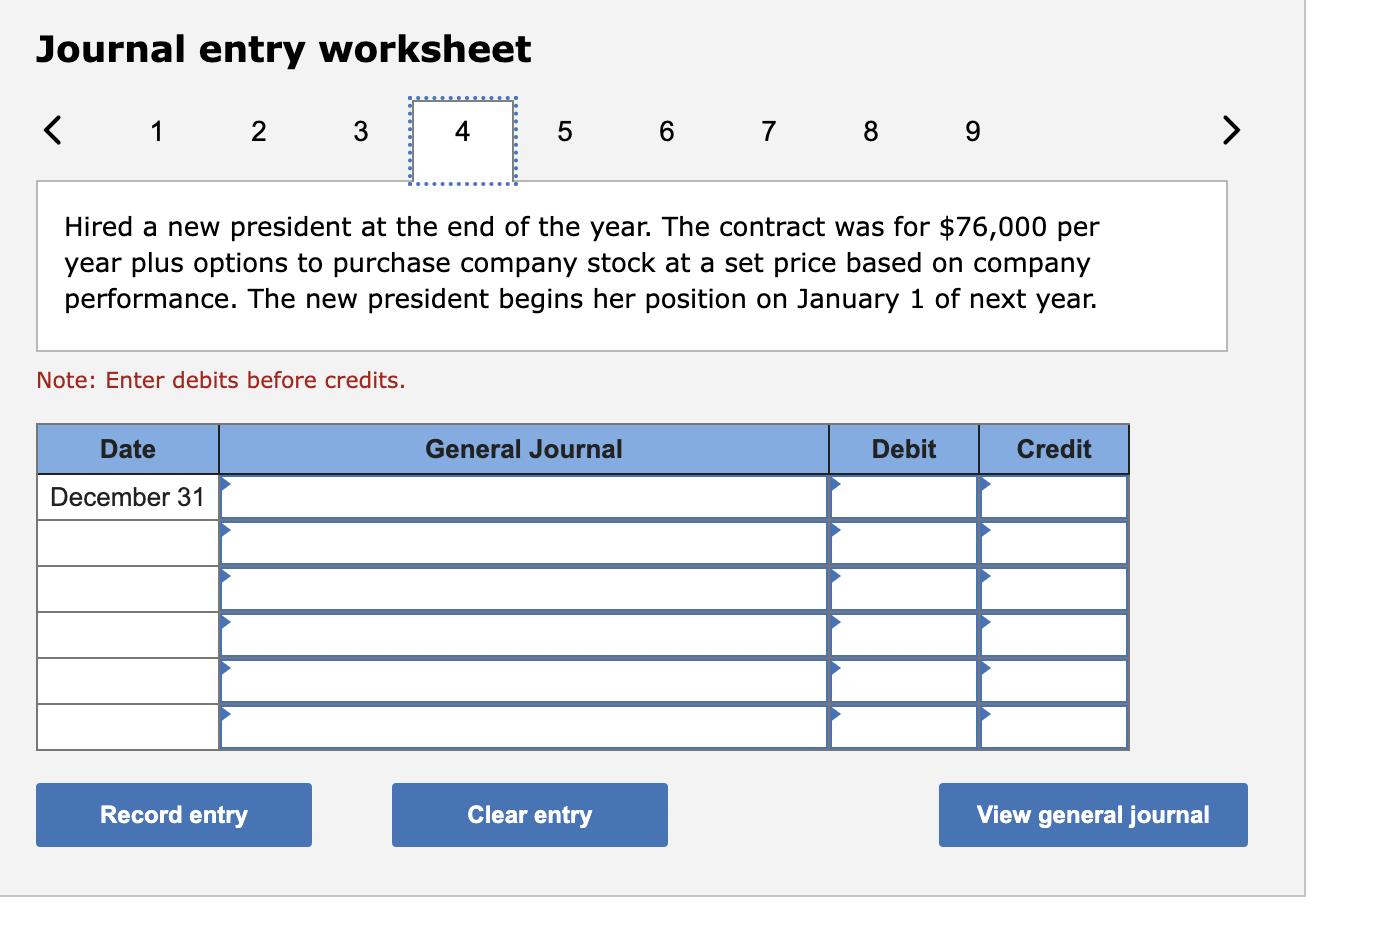 Journal entry worksheet ( <quad 1 ) Hired a new president at the end of the year. The contract was for ( $ 76,000 ) per